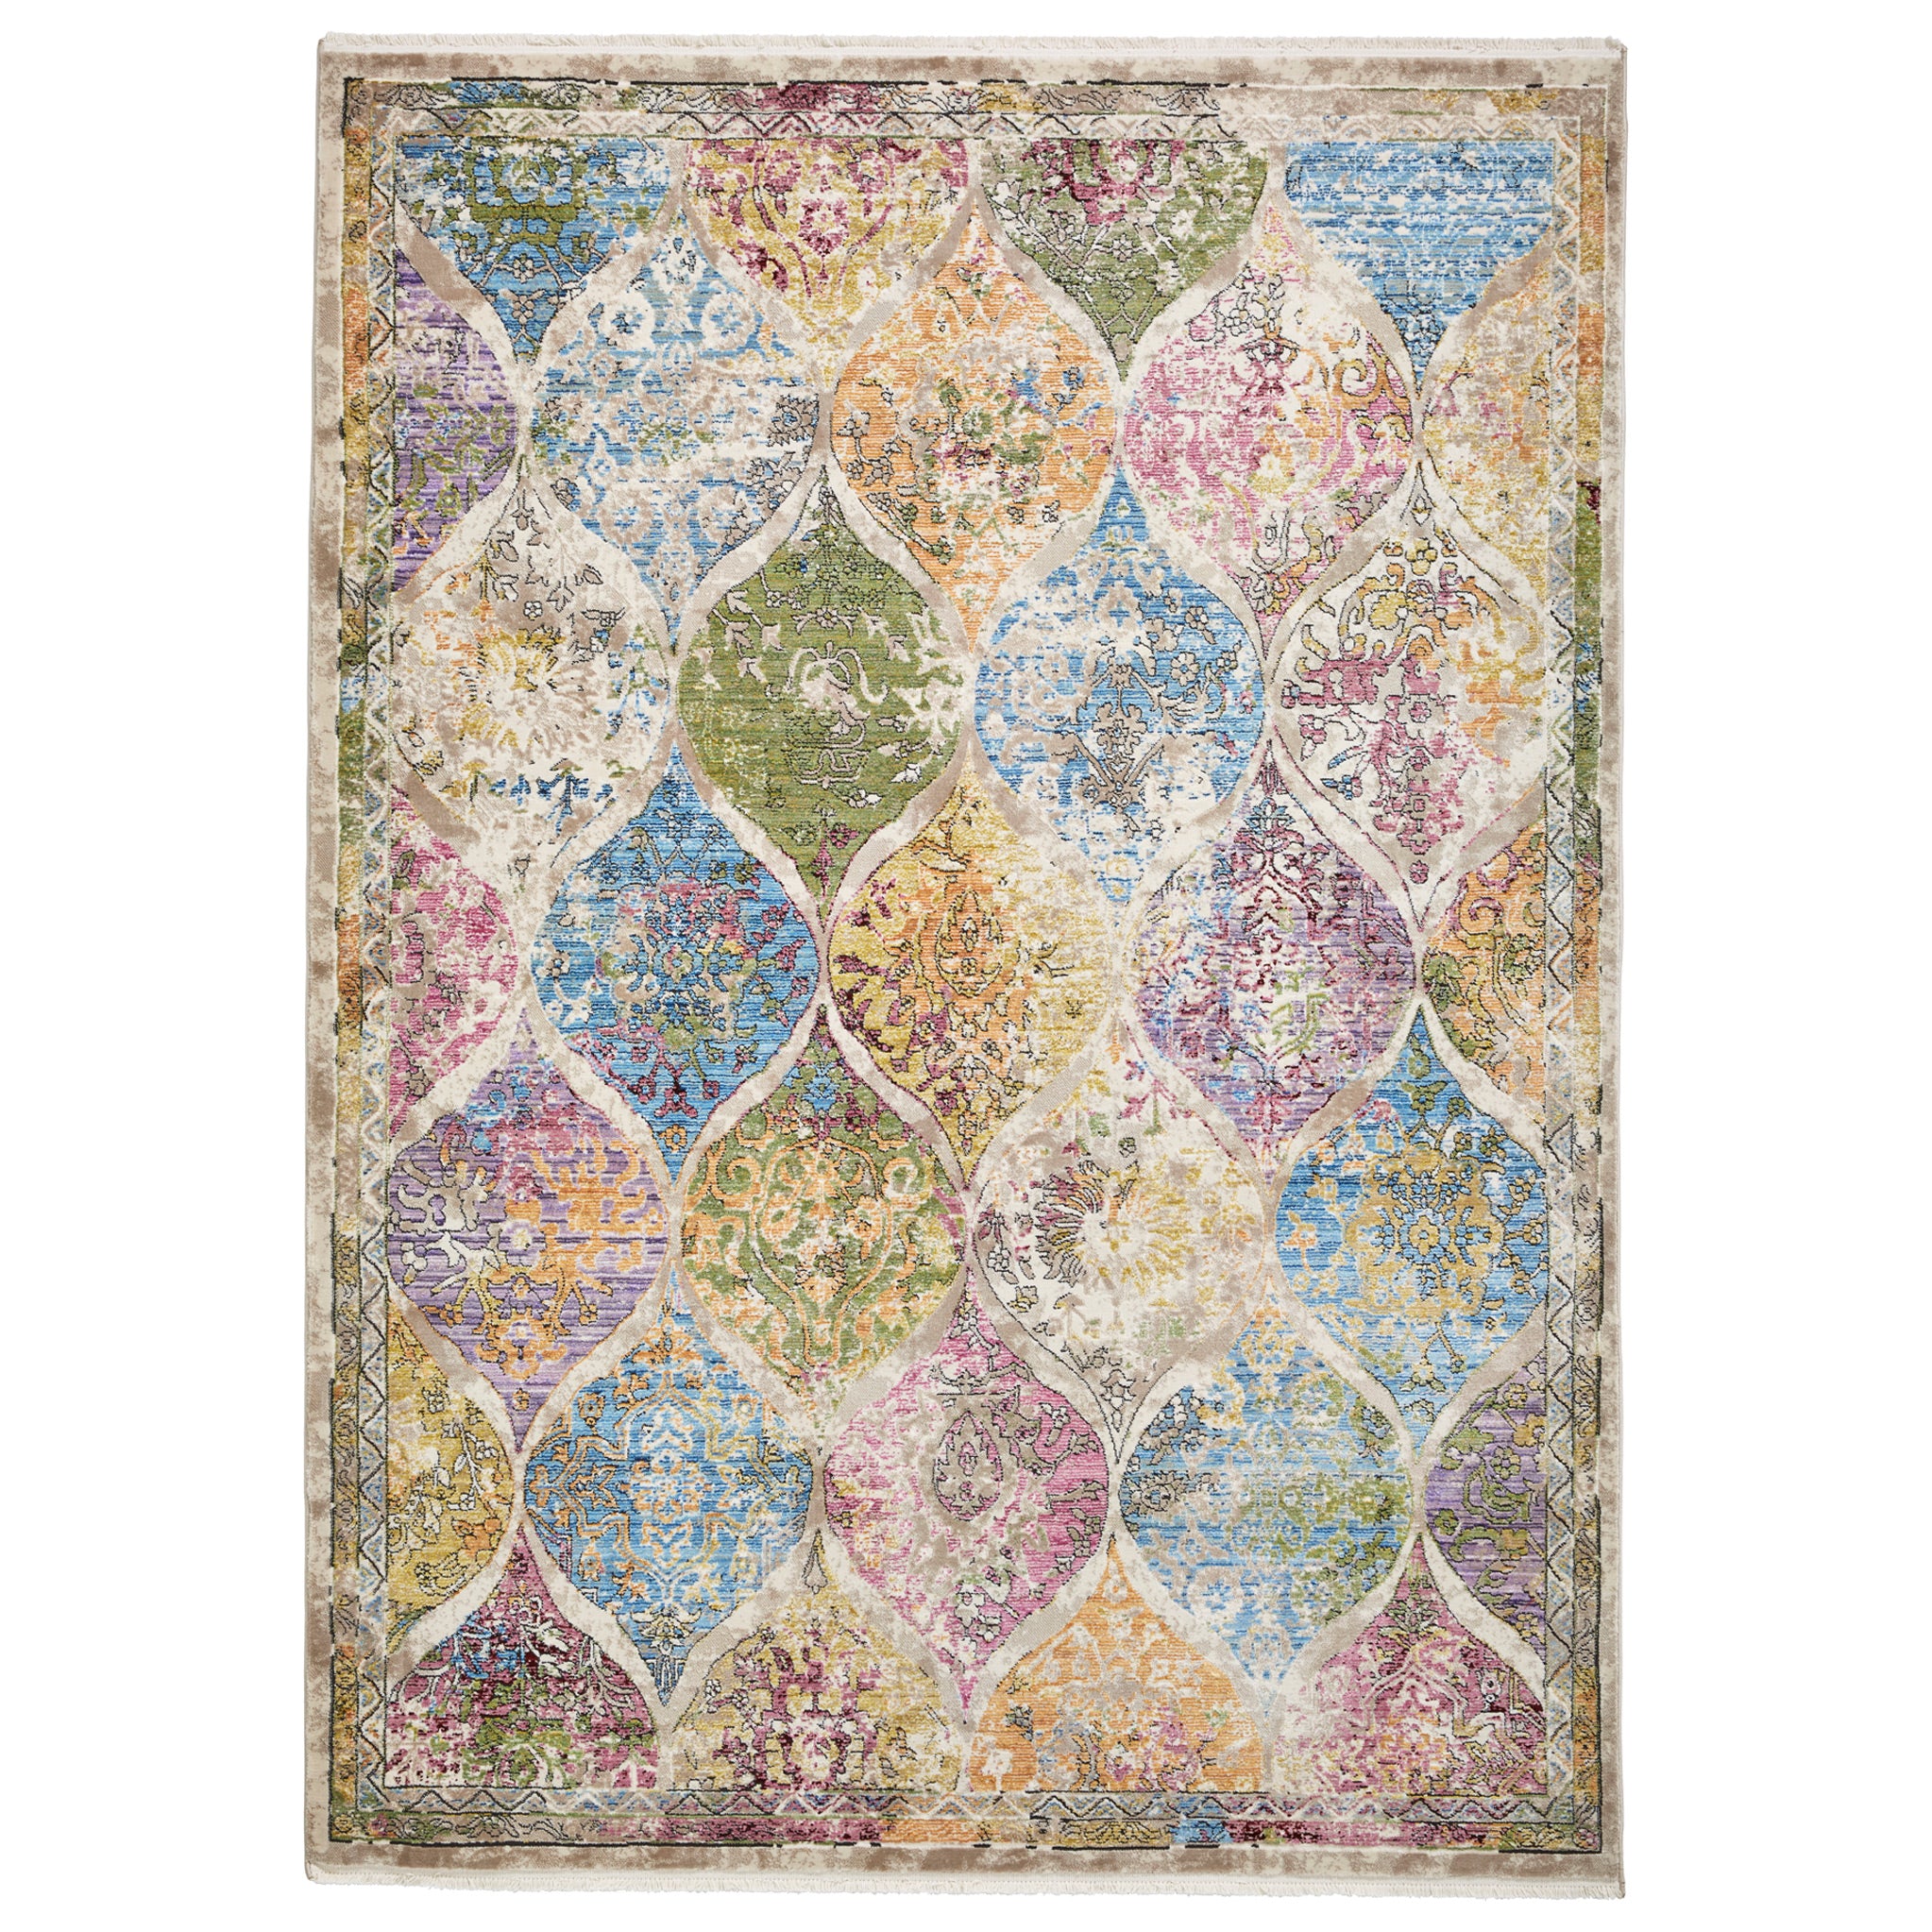 Thea Multicoloured Distressed Traditional Rectangular Rug For Living Room Or Bedroom